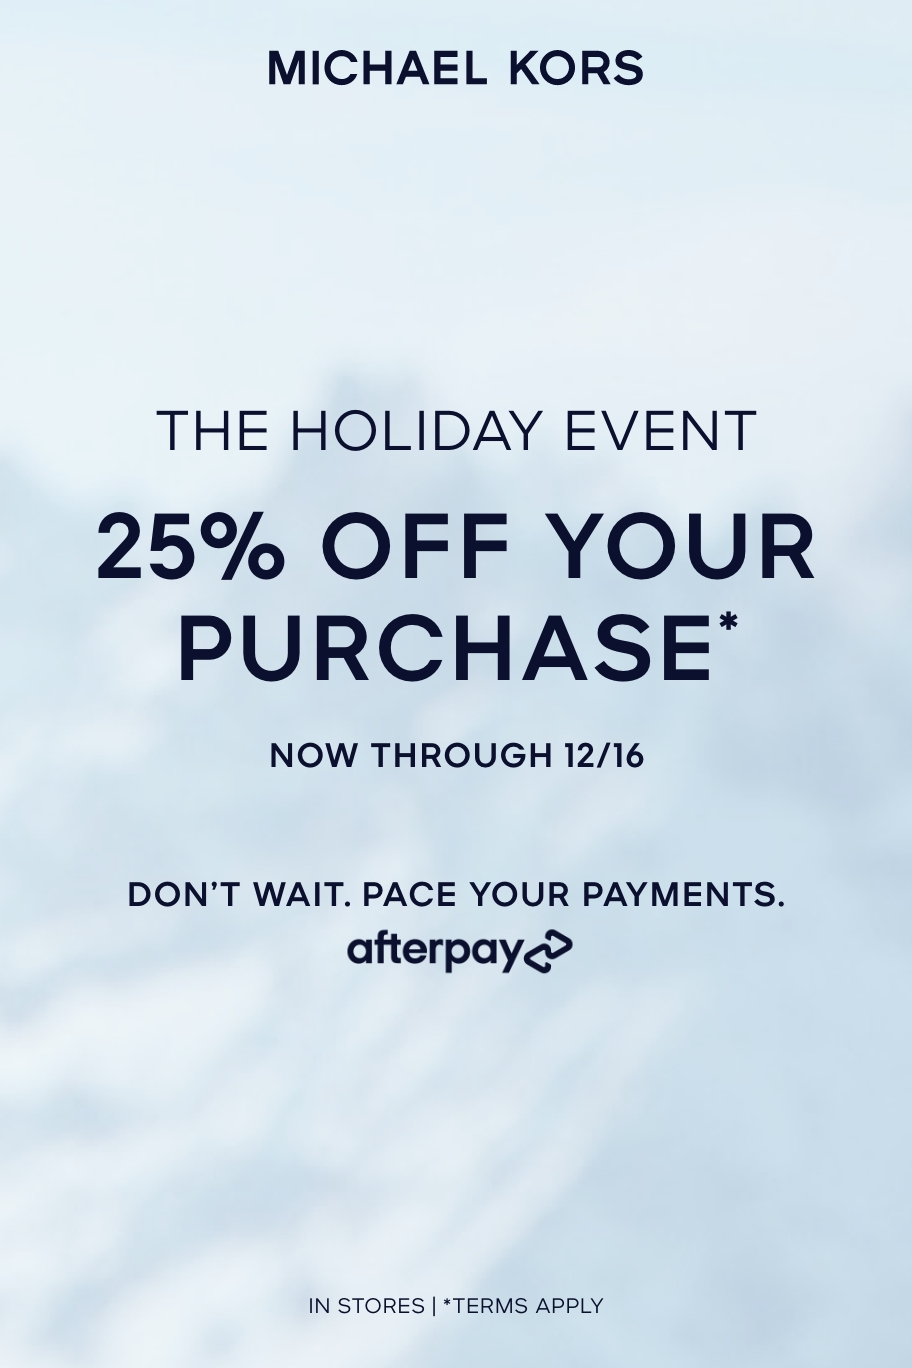 Enjoy 25% off your purchase during The Holiday Event, now through 12/16.